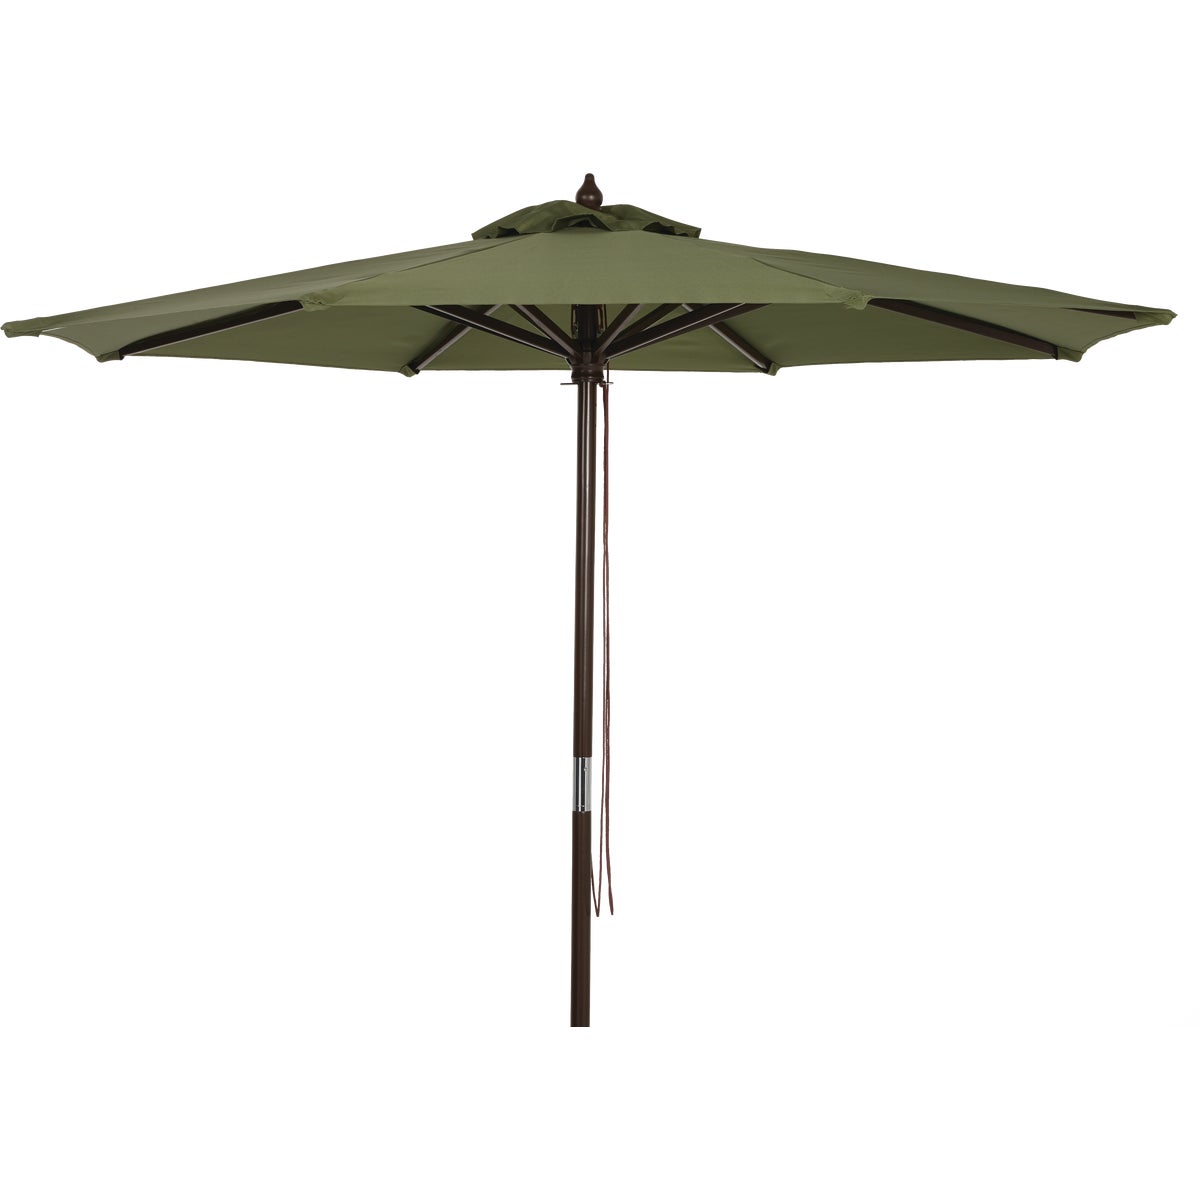 Outdoor Expressions 9 Ft. Pulley Heather Green Market Patio Umbrella with Chrome Plated Hardware